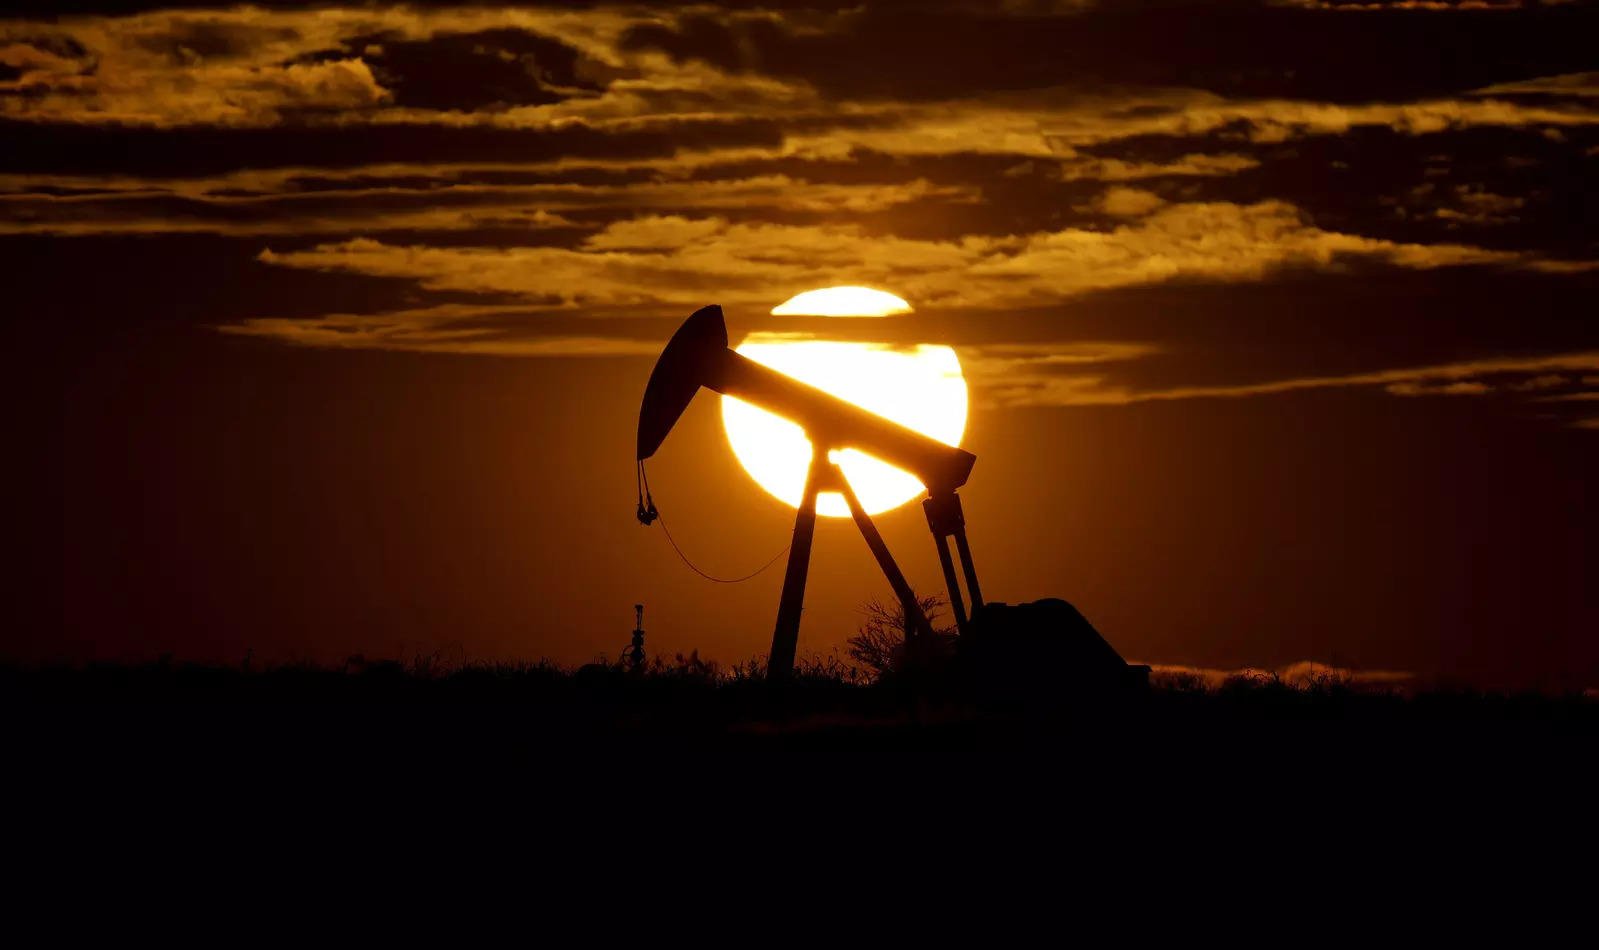     Oil prices have slumped for four consecutive months since June as COVID-19 lockdowns in top energy consumer China hurt demand during rising interest rates and the rising weight of the US dollar in global financial markets.